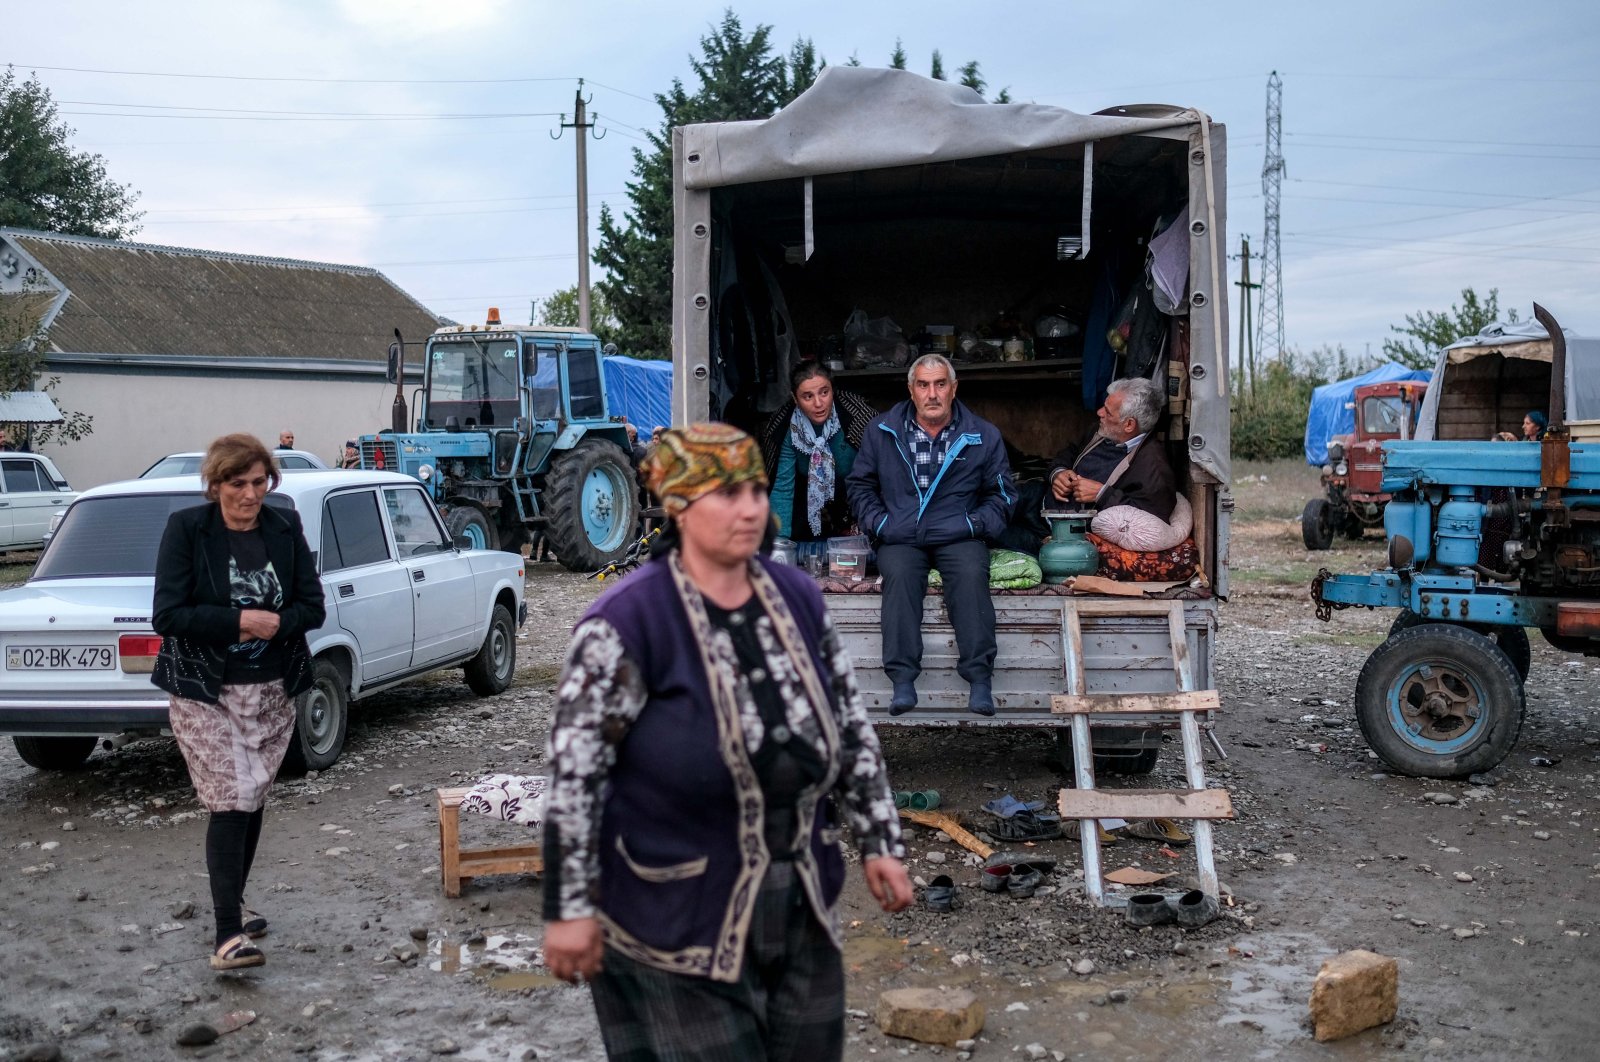 Azerbaijanis living in villages close to conflict zones are exposed to attacks from the Armenian military, Oct. 8, 2020. (Sabah Photo)